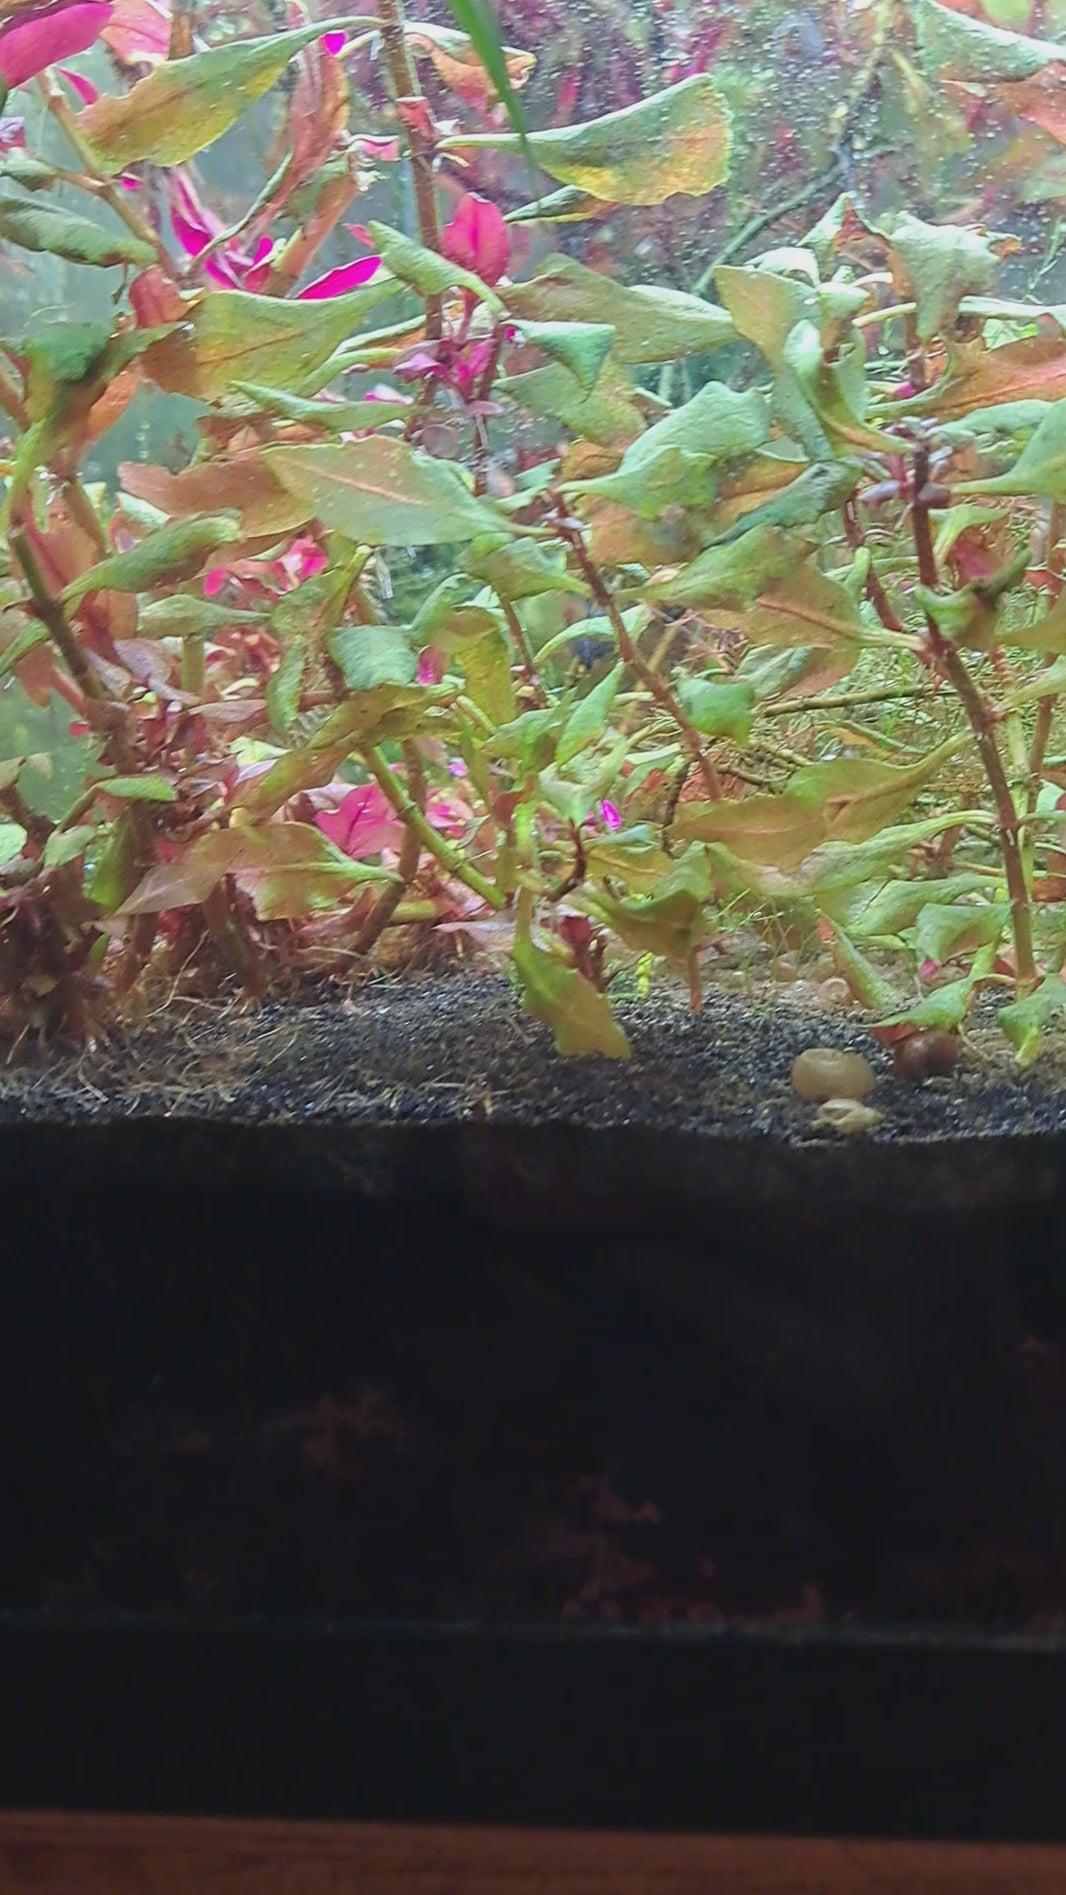 Home aquarium with red and green plants featuring Paraphanius mento Zengen males and females